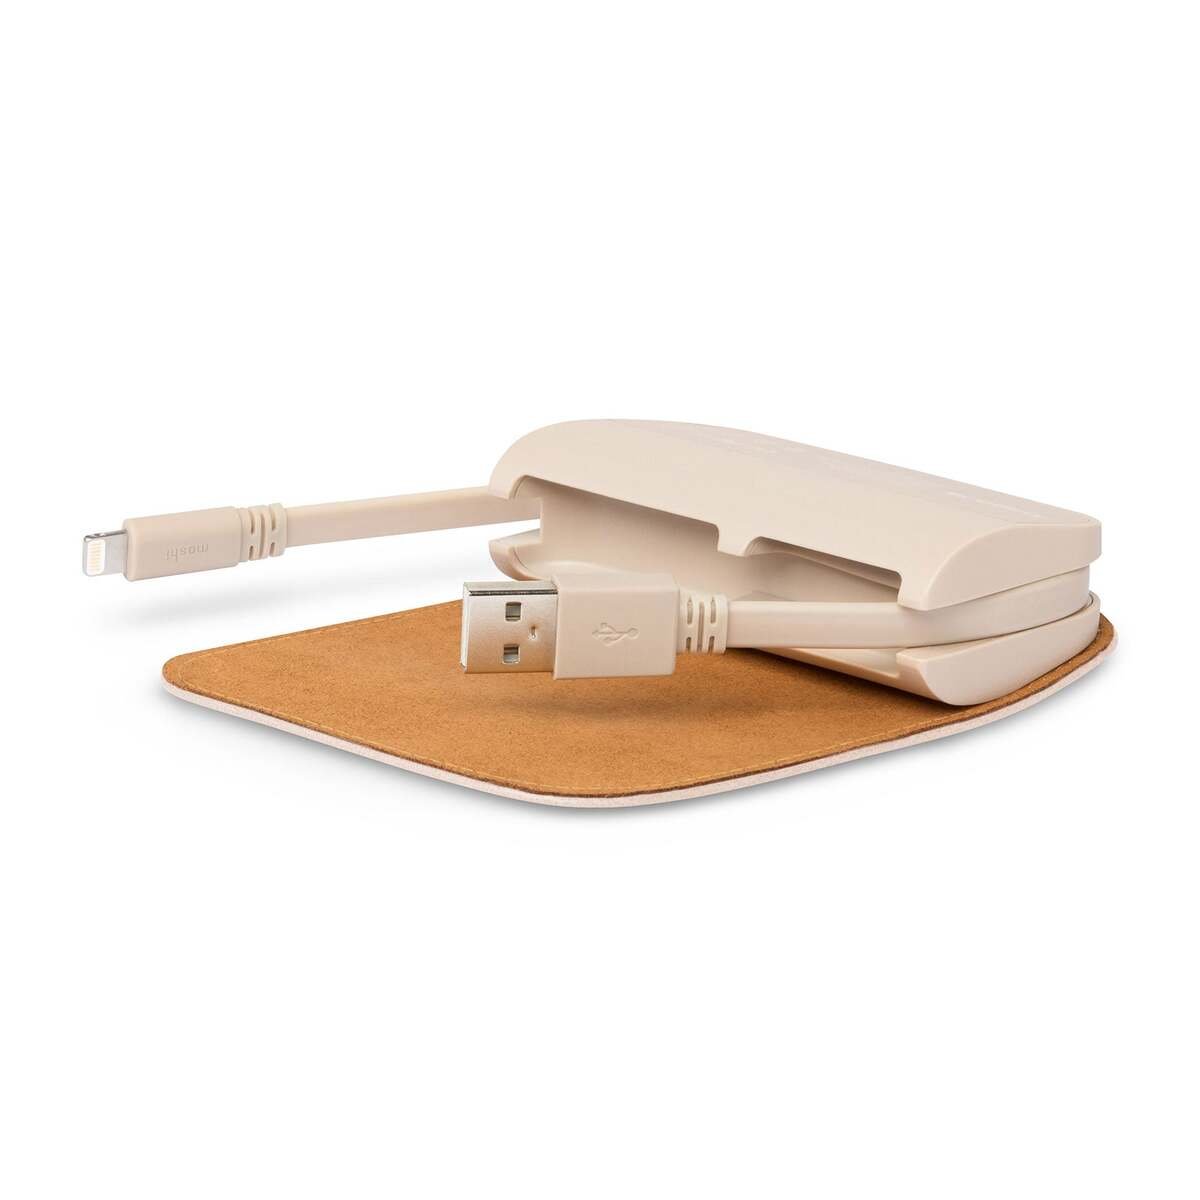 MOSHI IonGo 5K Portable Battery with built-in Lightning and USB-A Cables - Ivory White